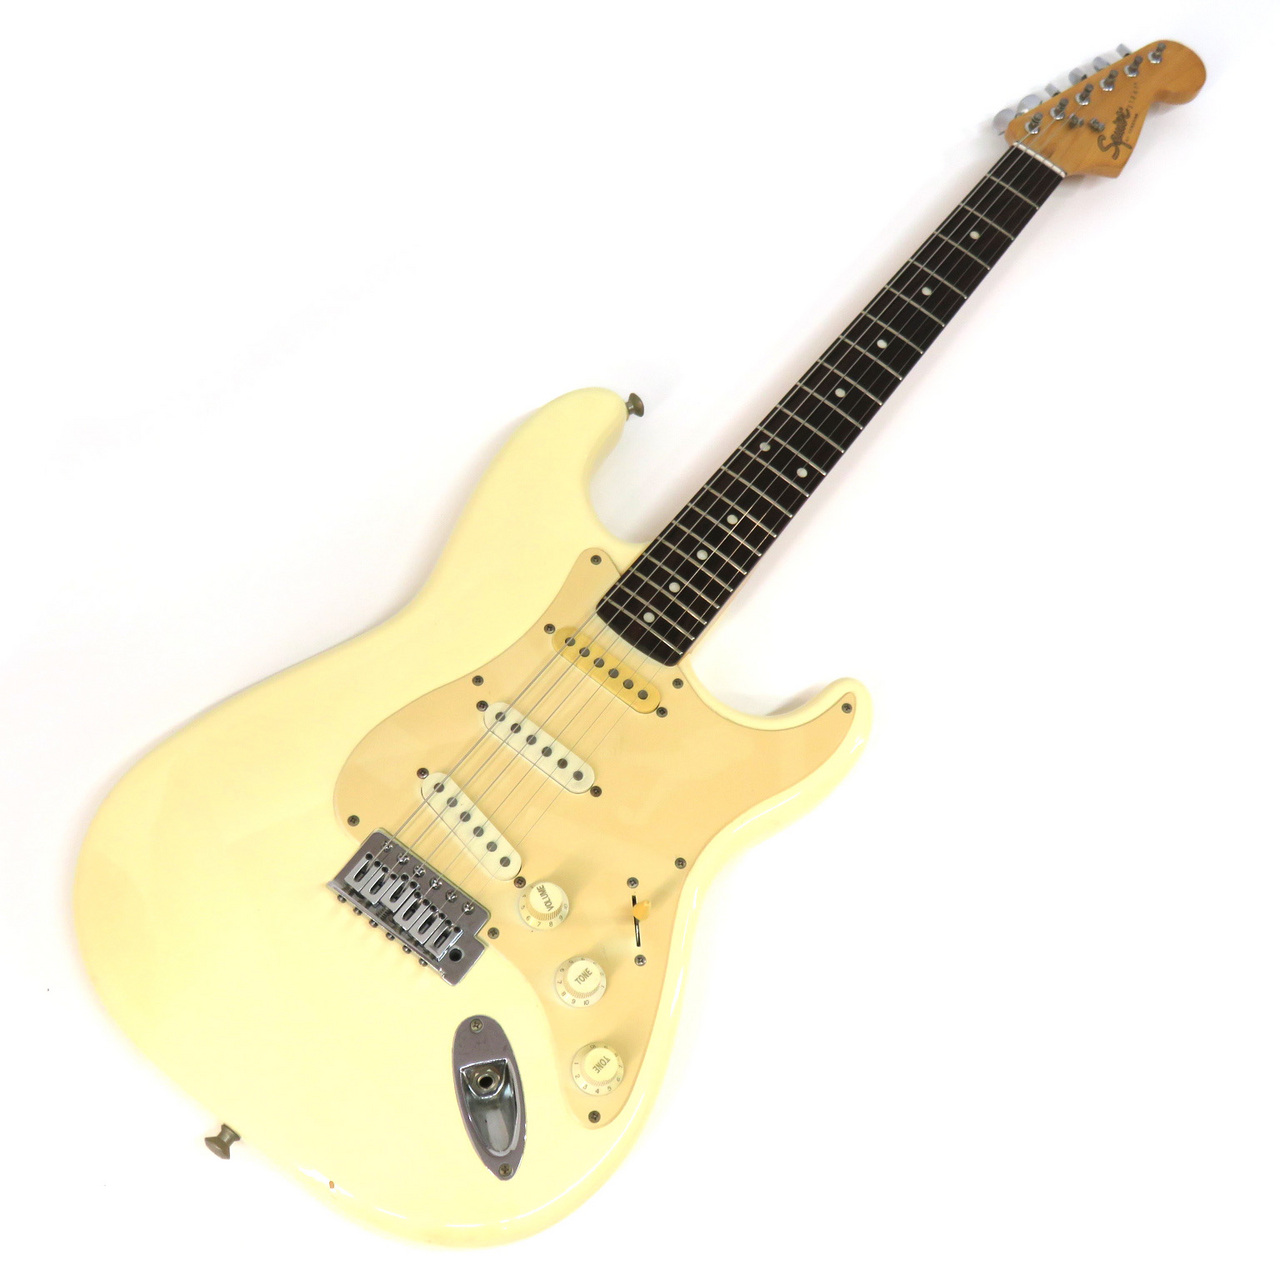 【4731】 Squier by fender Stratocaster